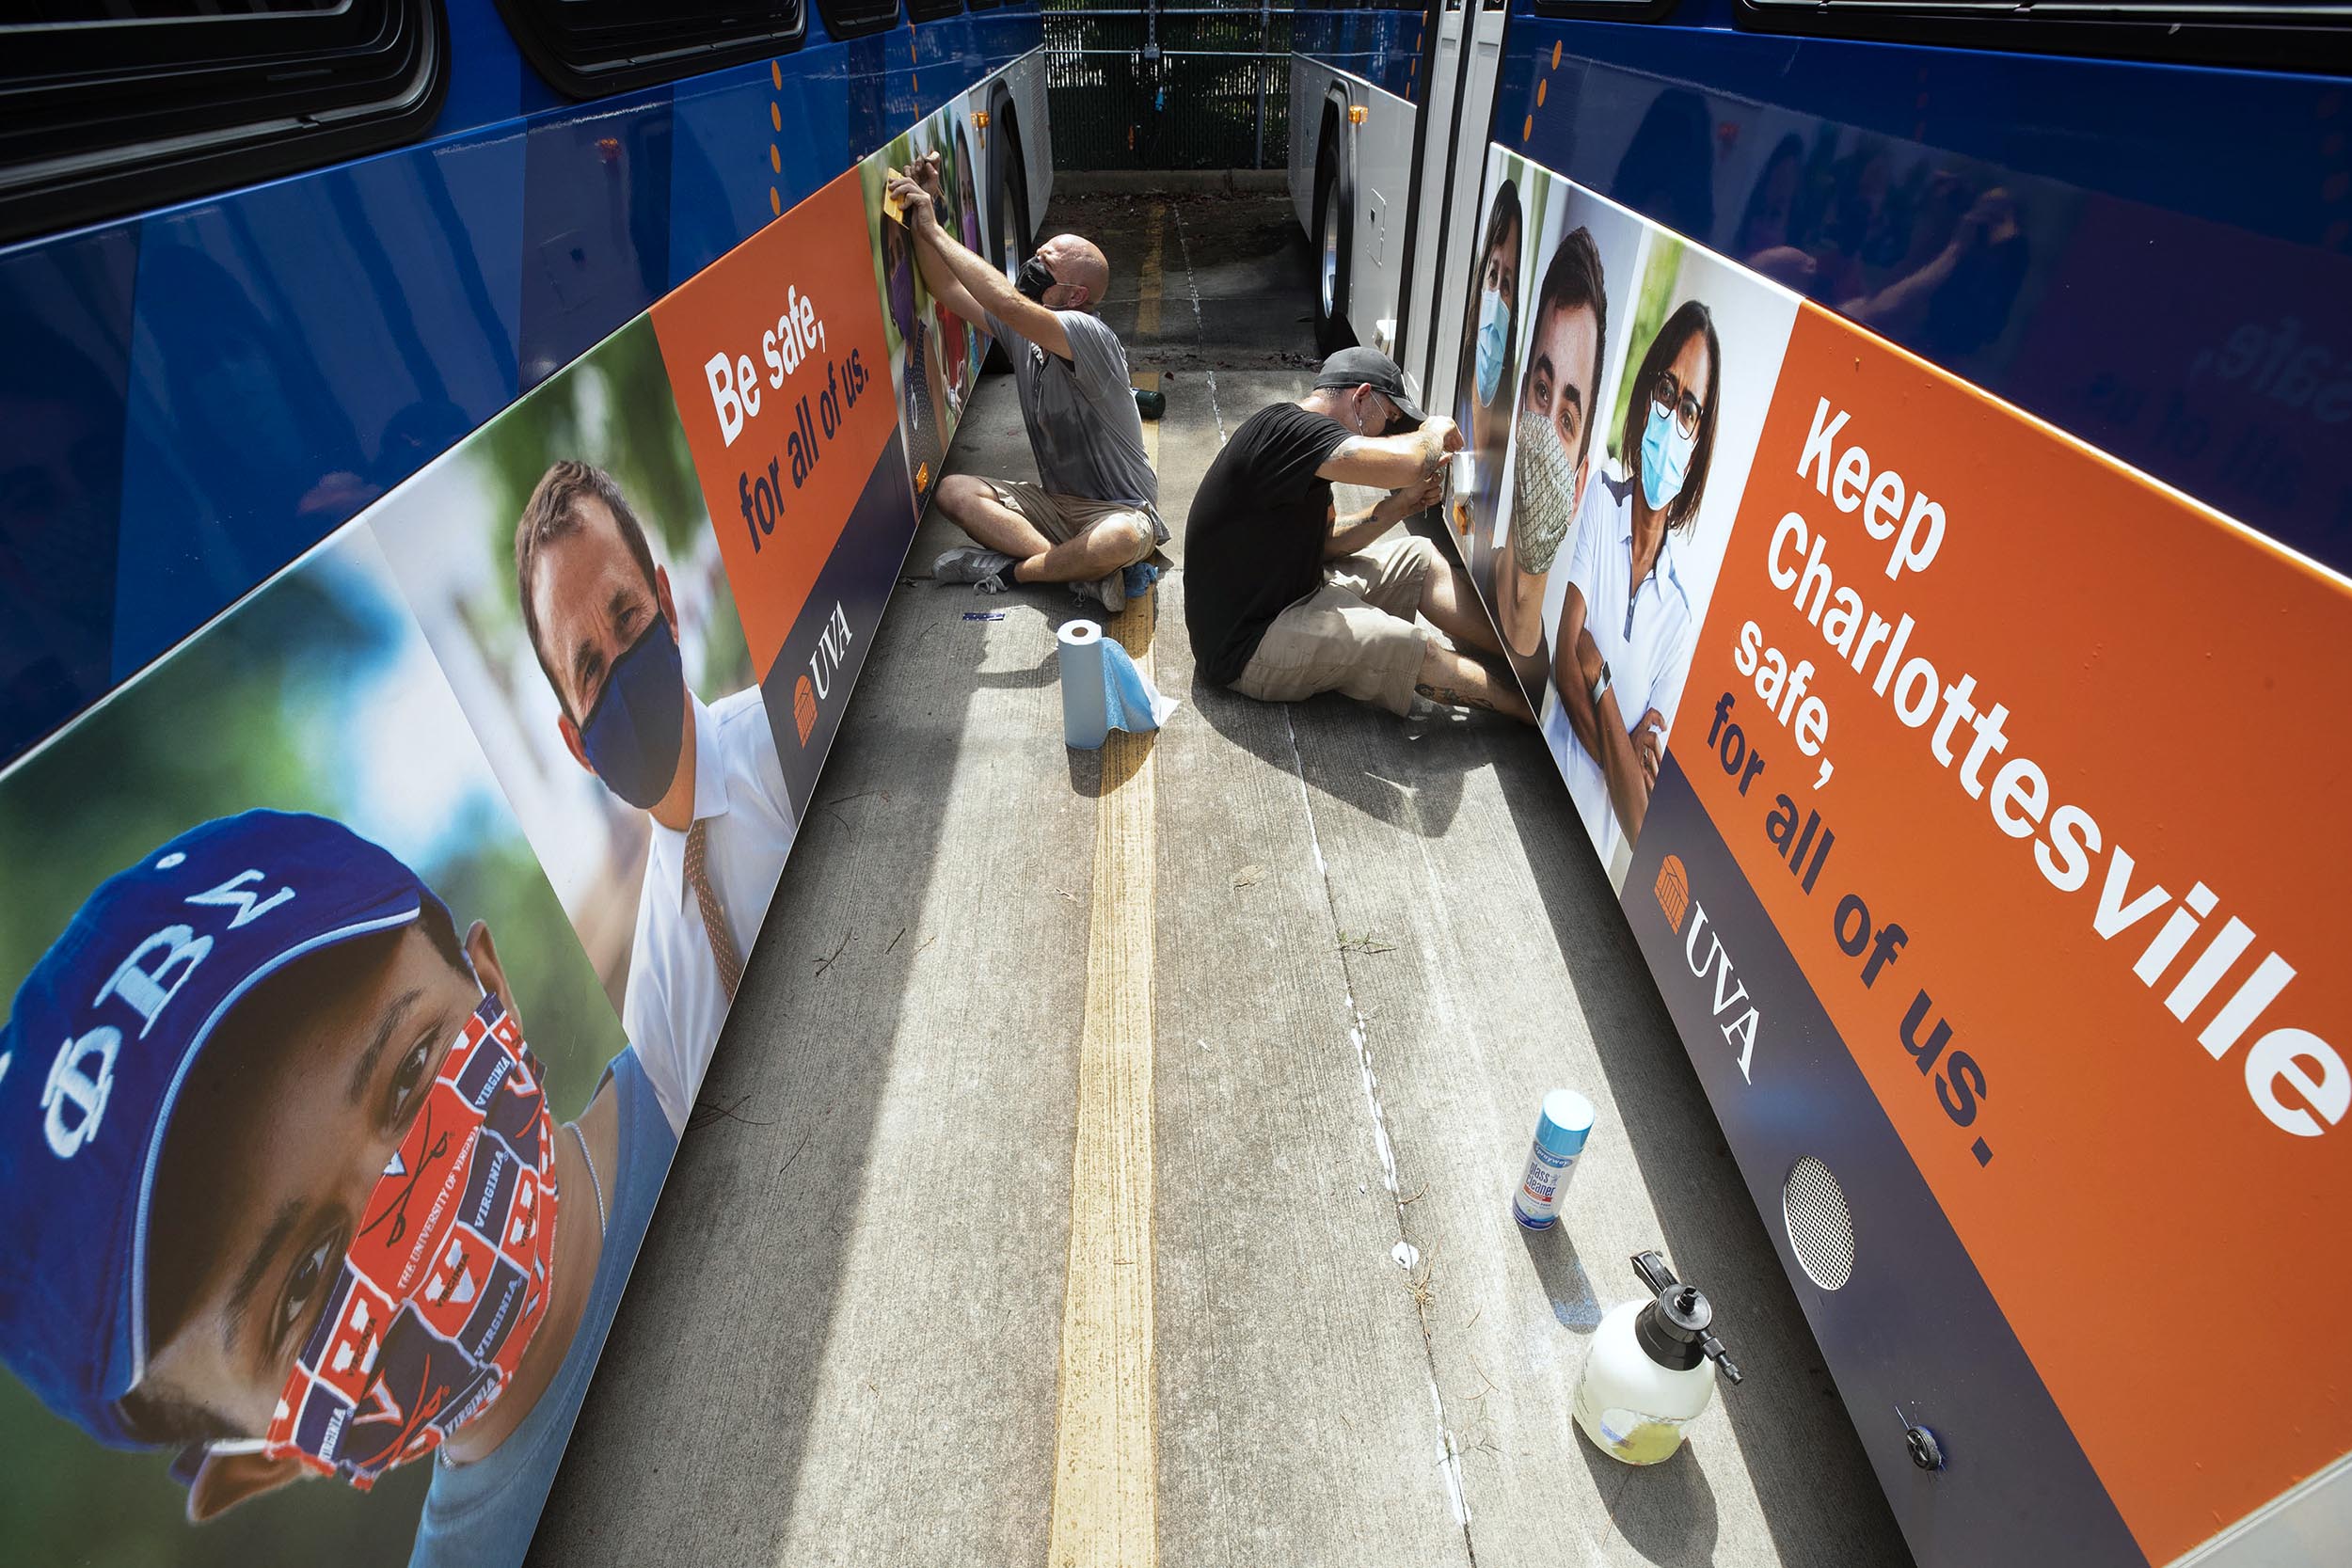 UVA Staff members working on placing signs on the outside of the busses